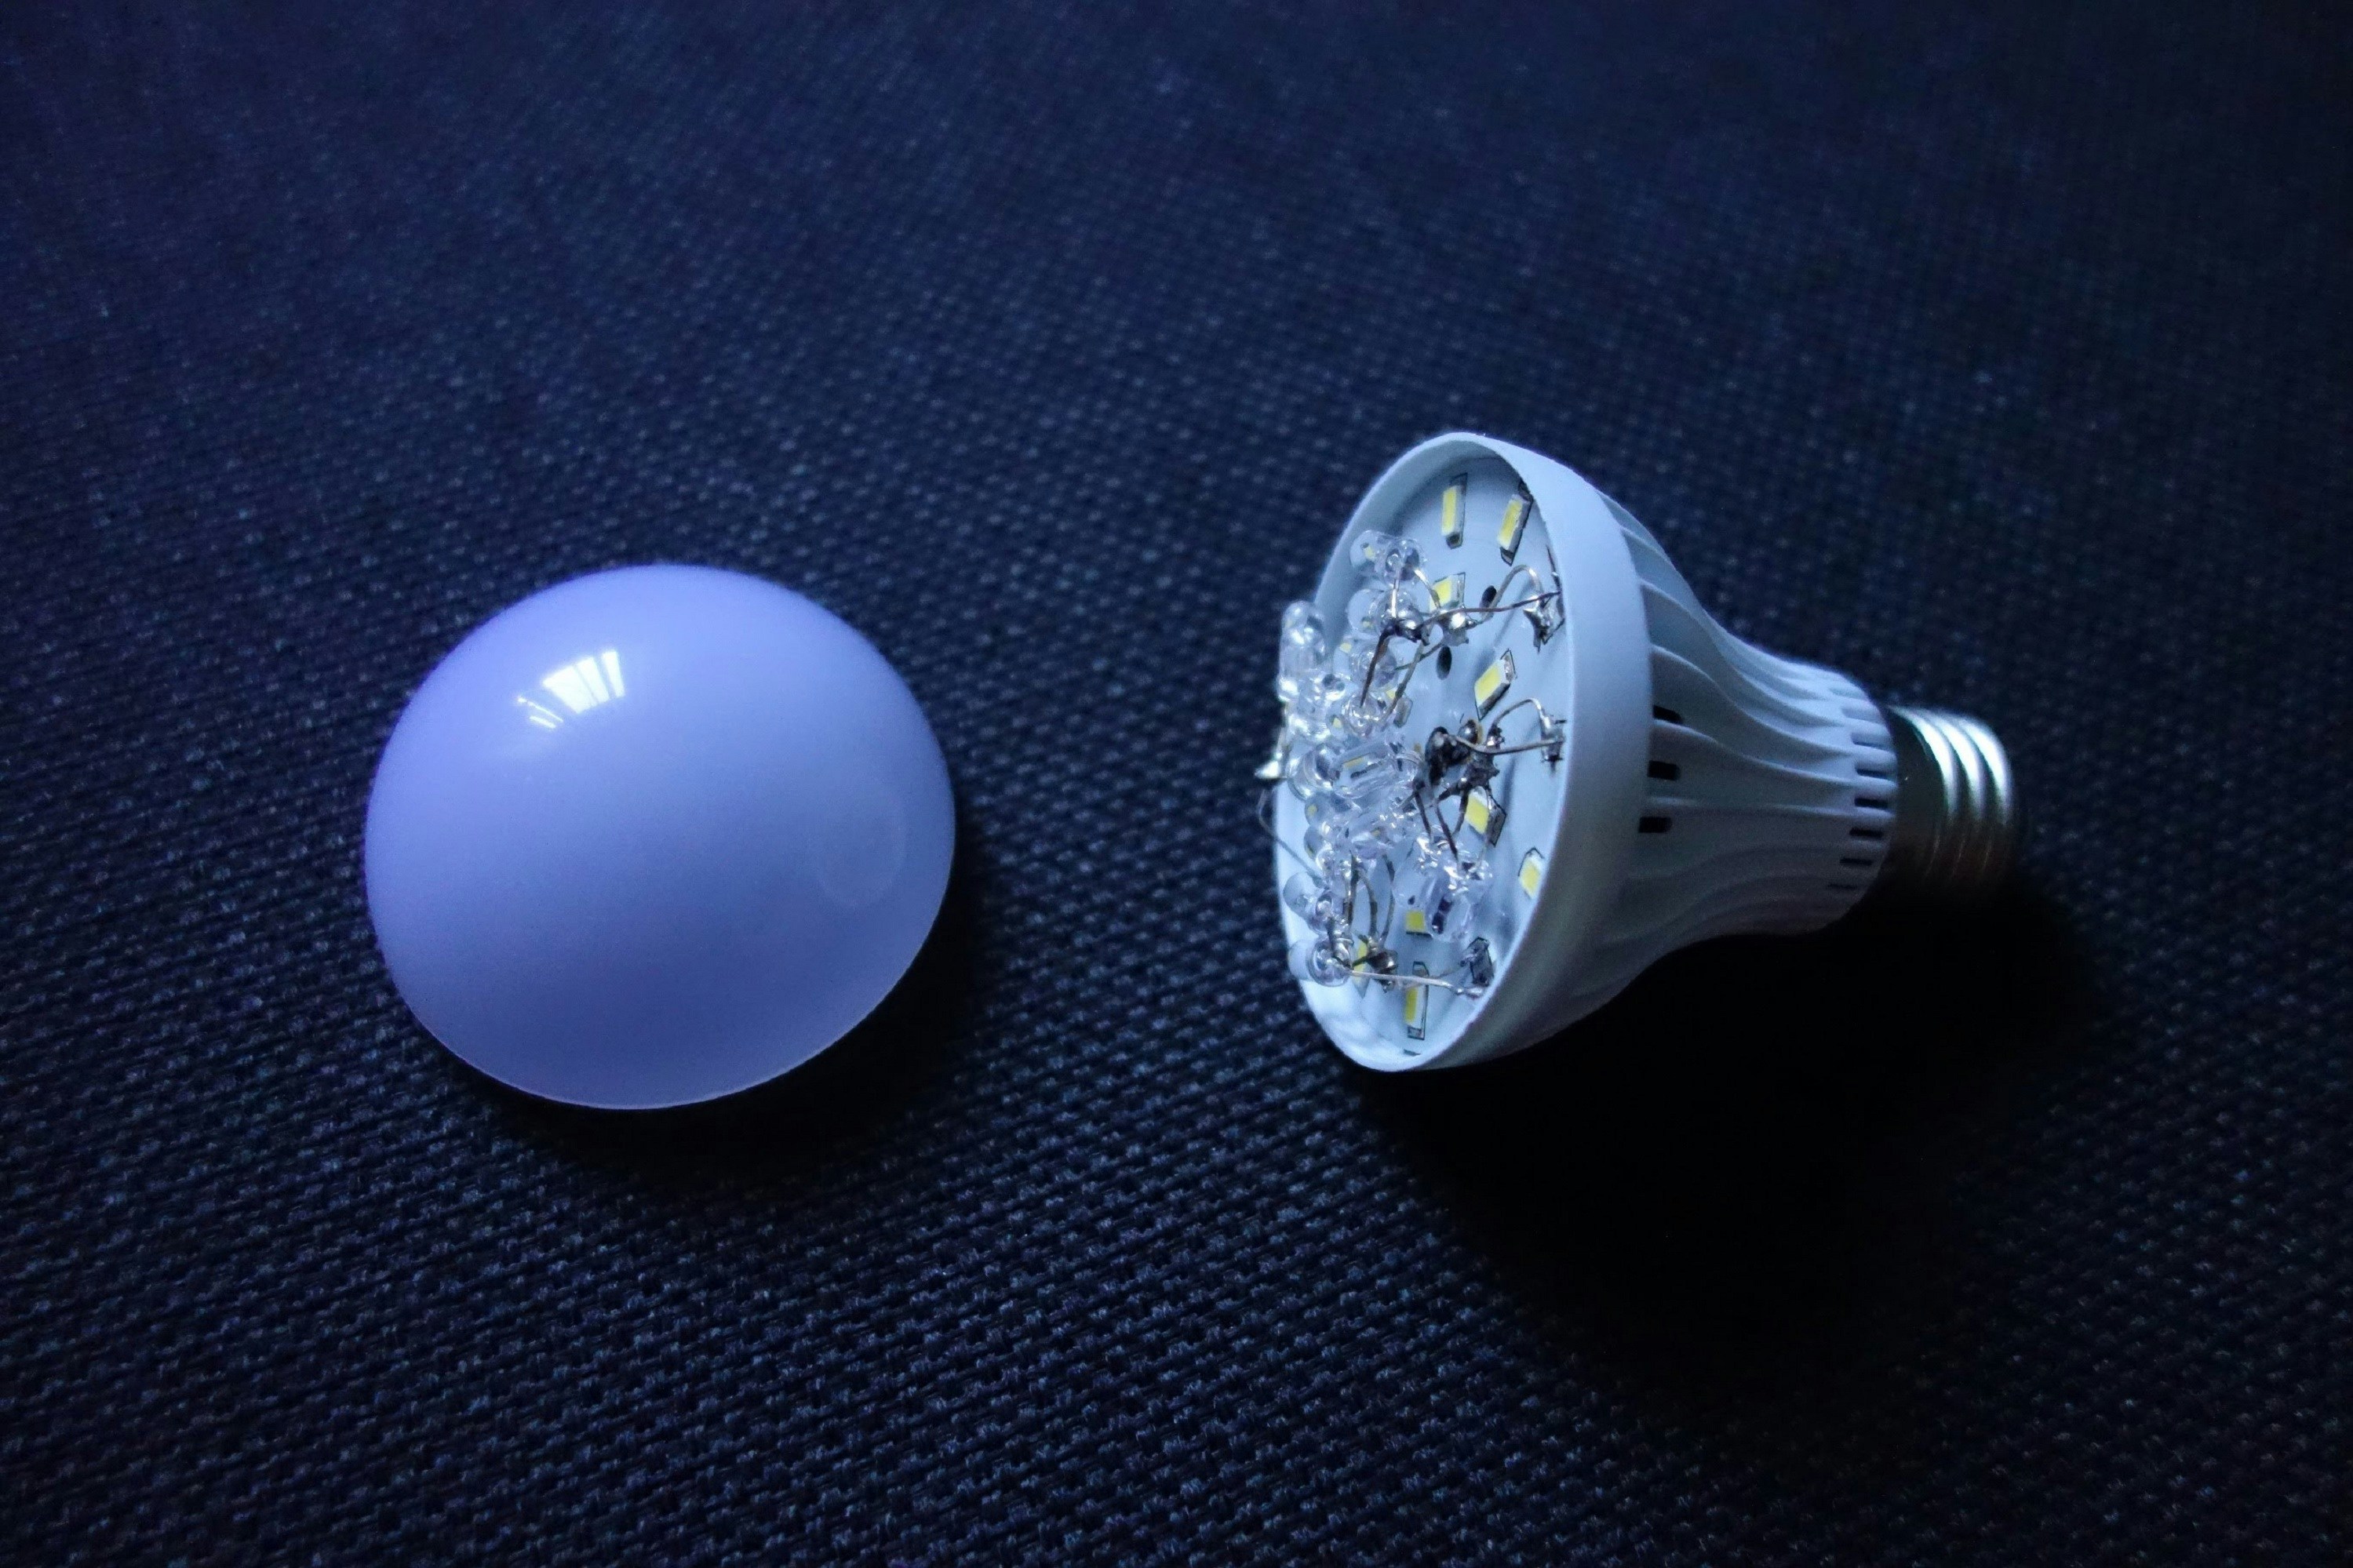 LED bulb outshining other light bulb options